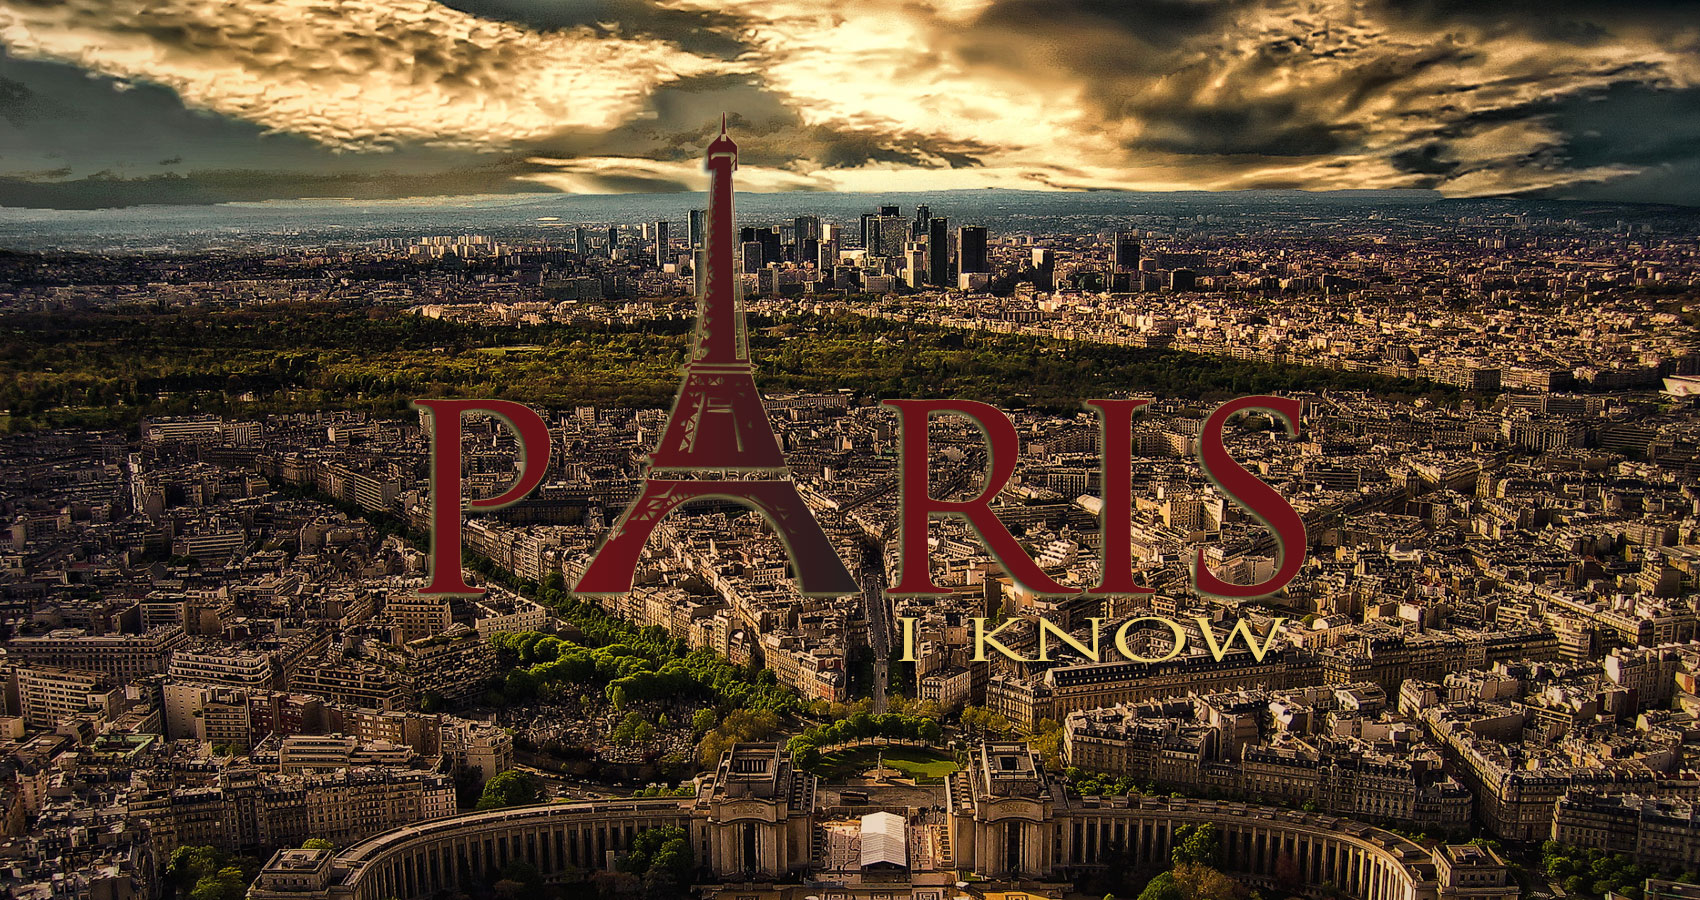 Paris, I know by Leanne Howard Kenney at Spillwords.com